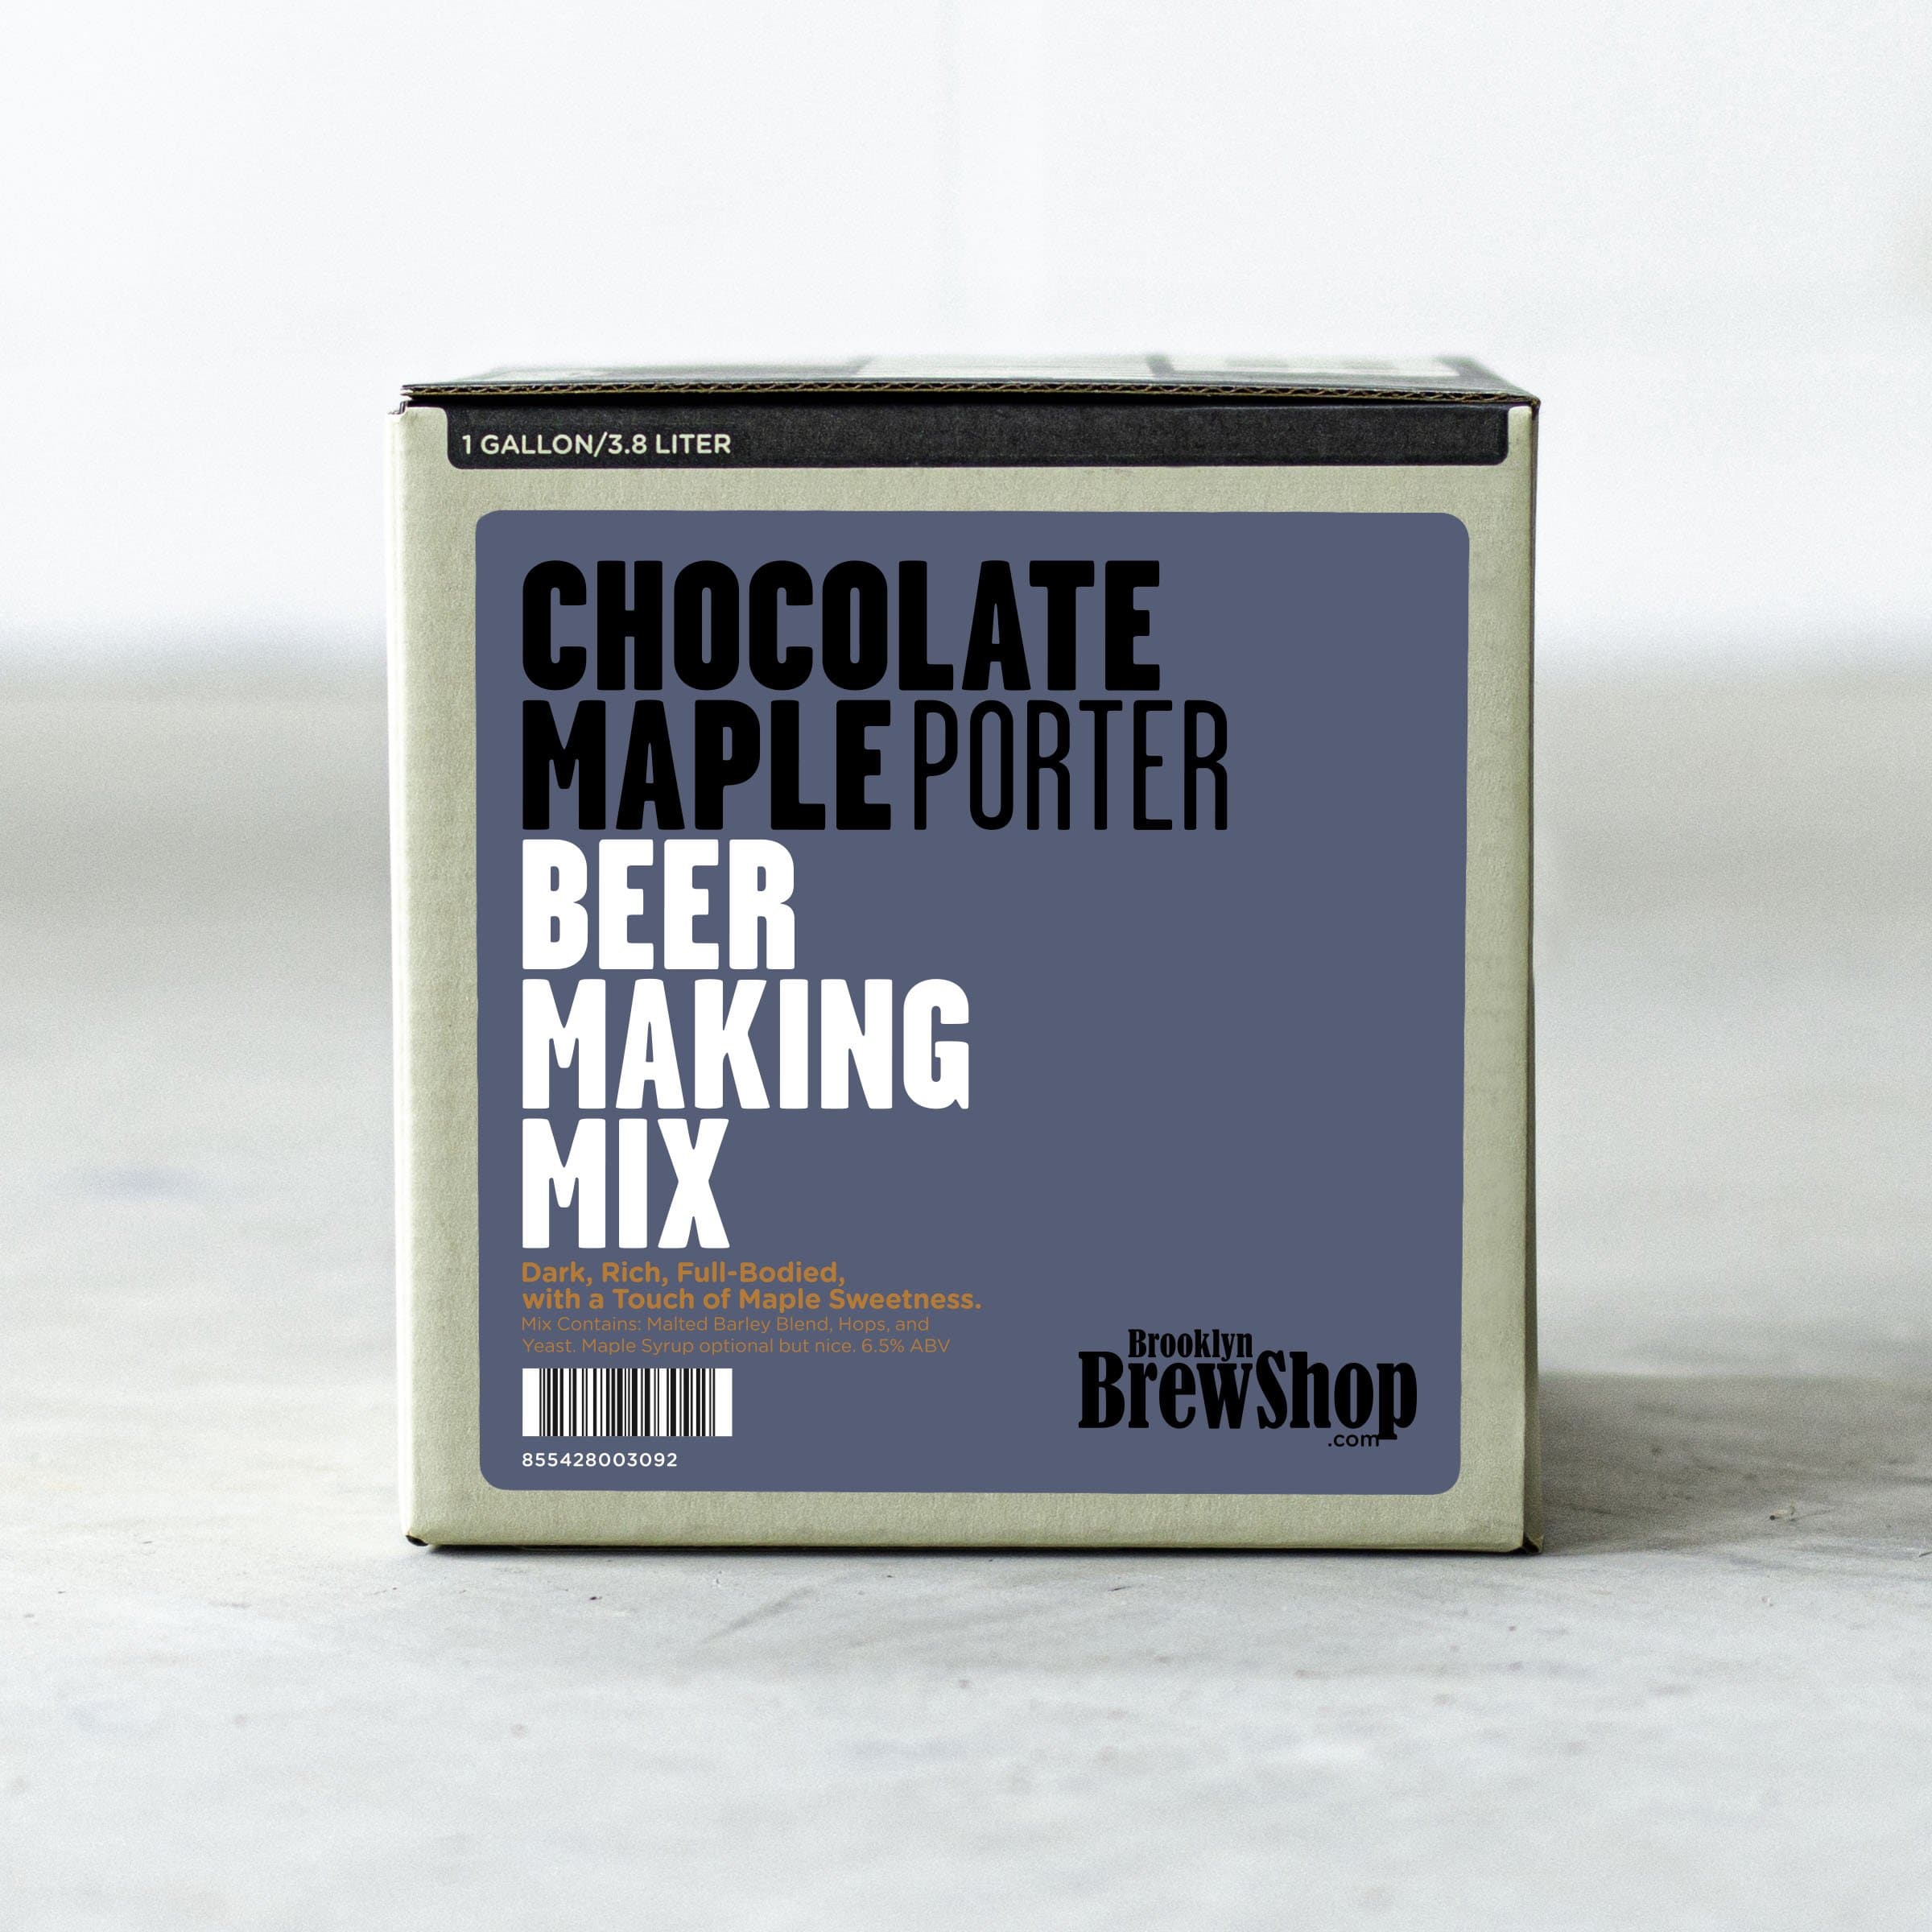 Chocolate Maple Porter: Beer Making Mix